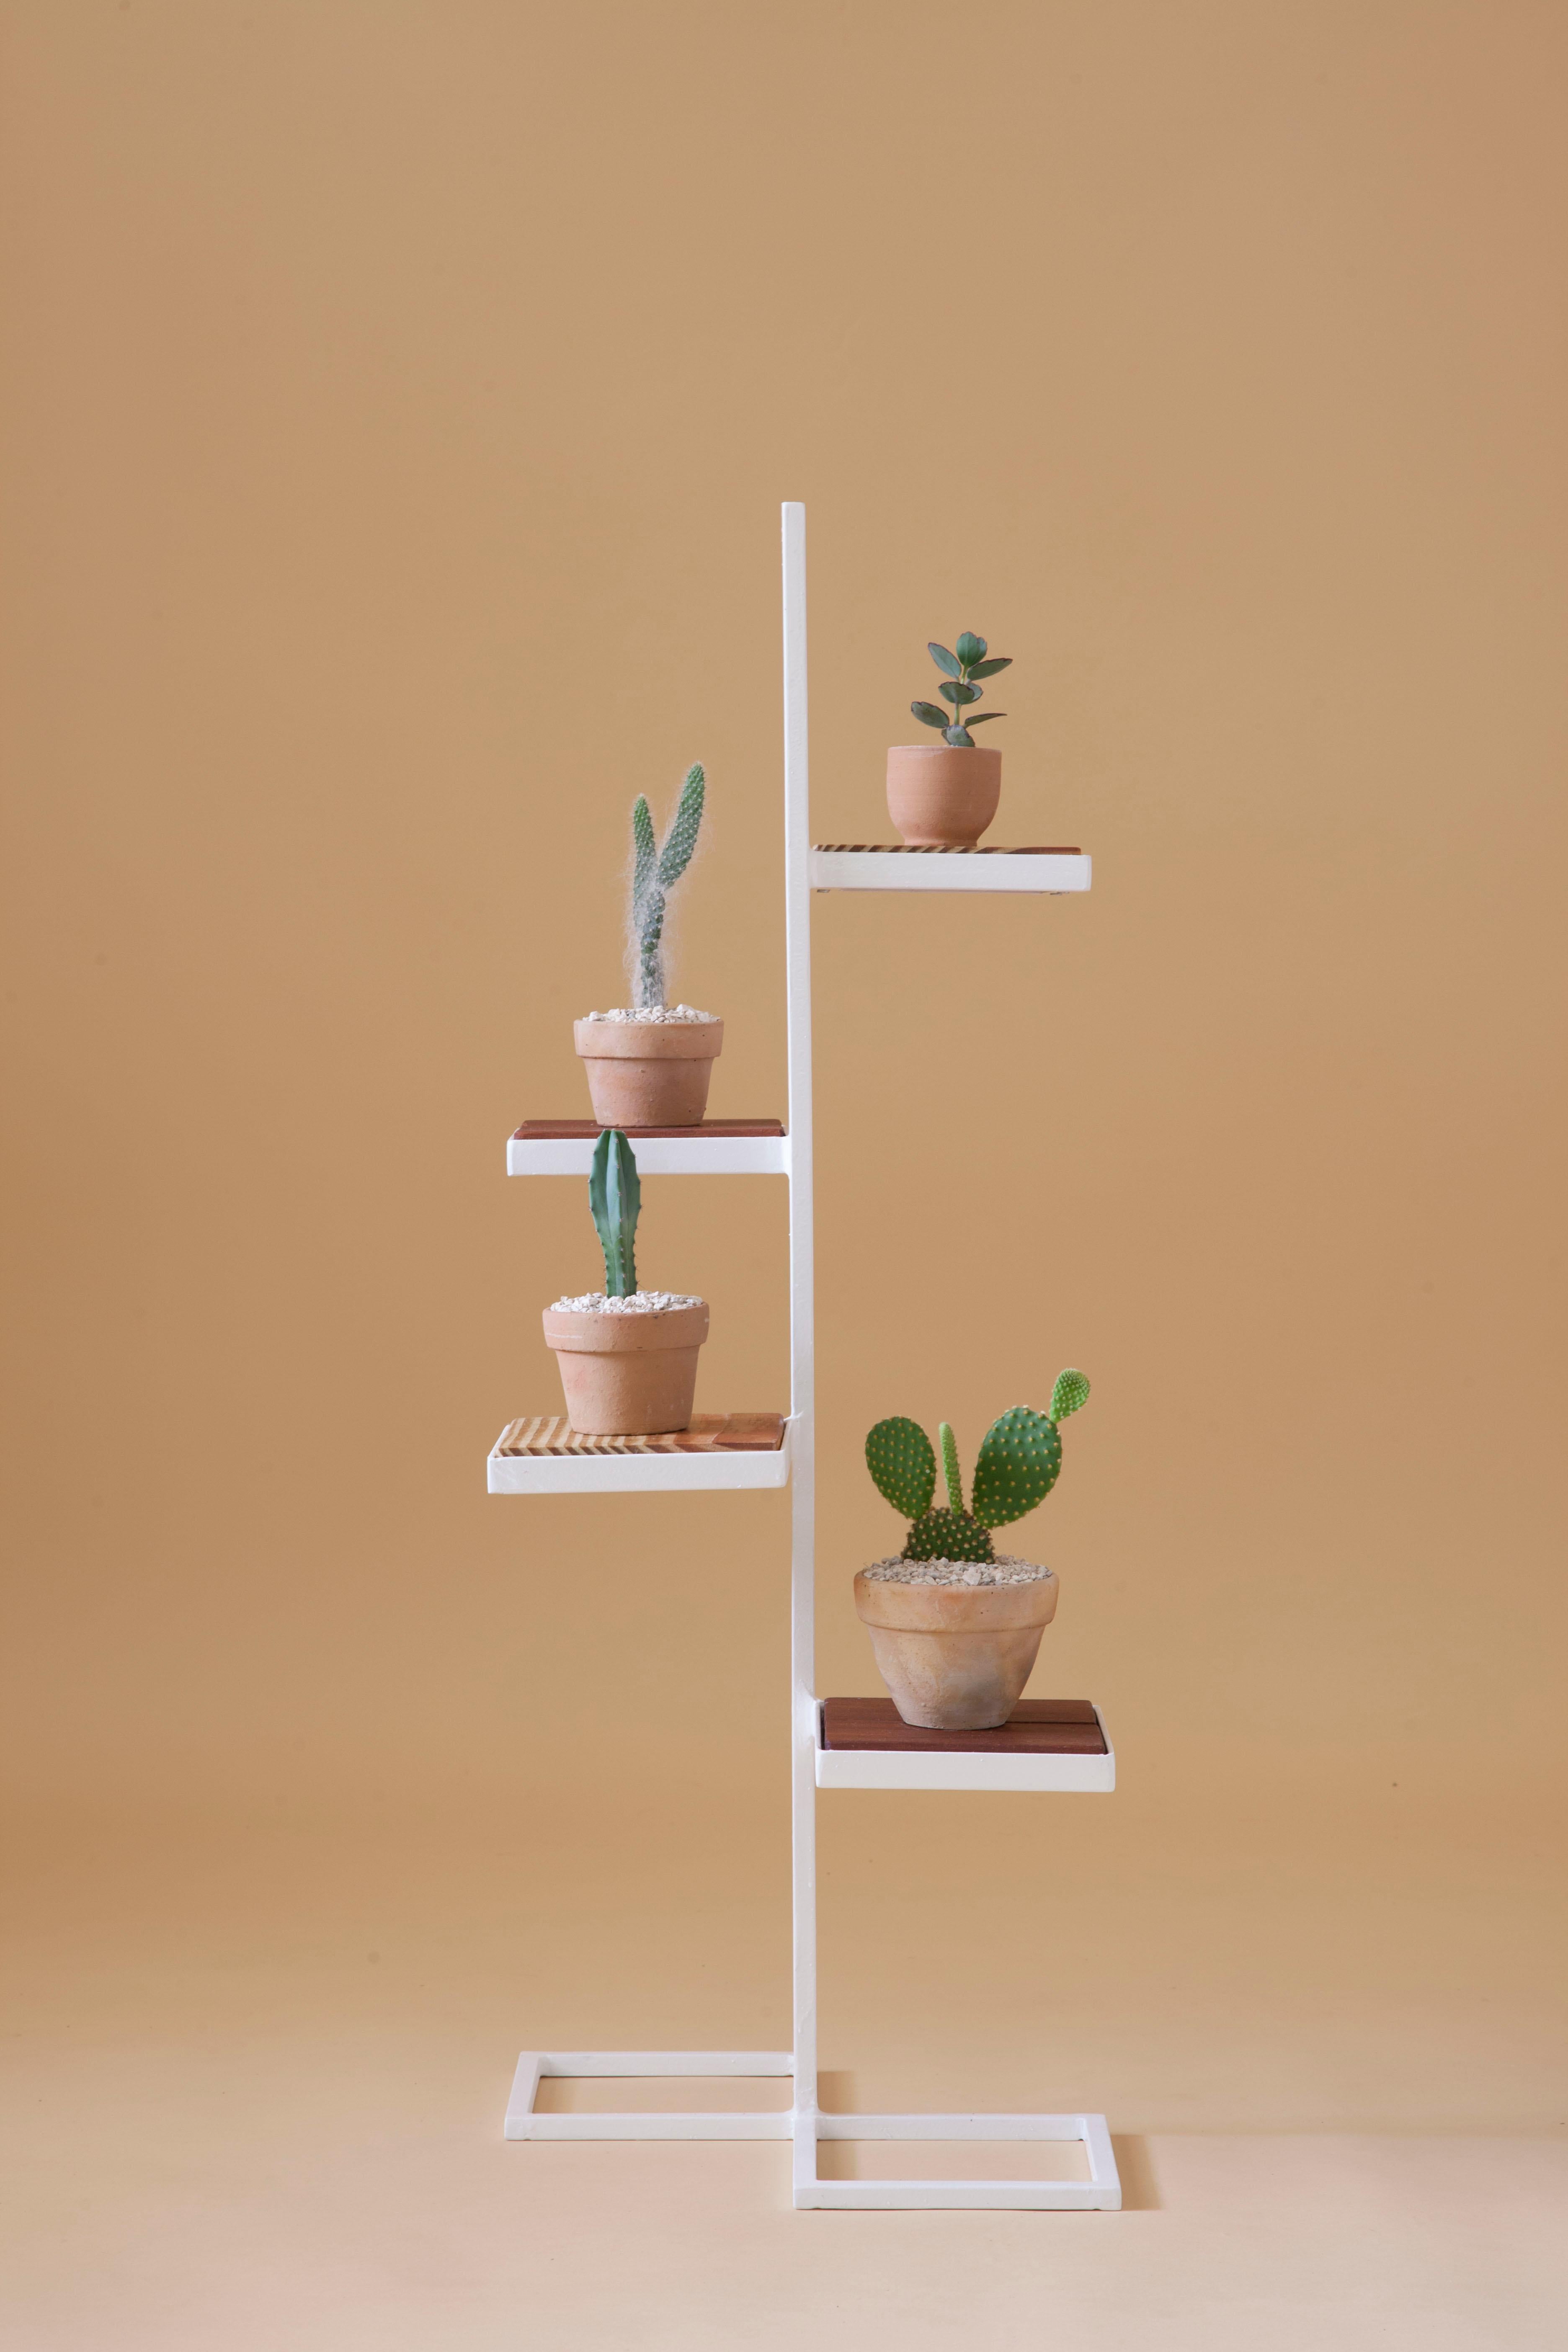 Aurea plant stand 3 by Sofia Alvarado
Limited edition 1 of 10 (one in stock)
Materials: Metal & woods / golden, white or black.
Dimensions: 86cm (H) x 32cm (W) x 32cm (D)

FI is an ornamental artist who embodies the creative revelation of the